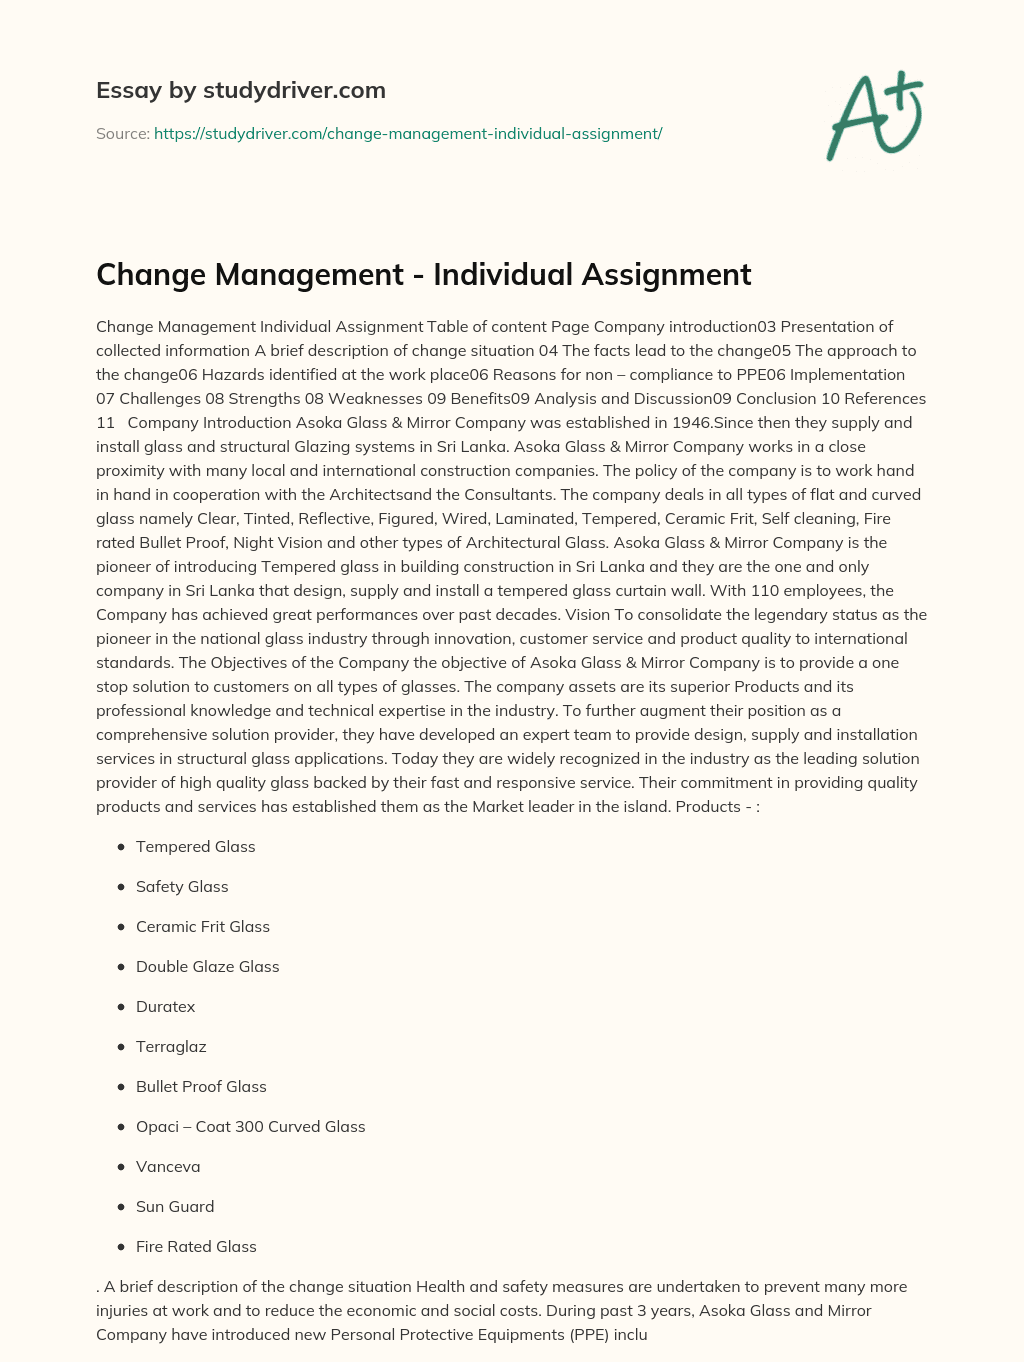 Change Management – Individual Assignment essay